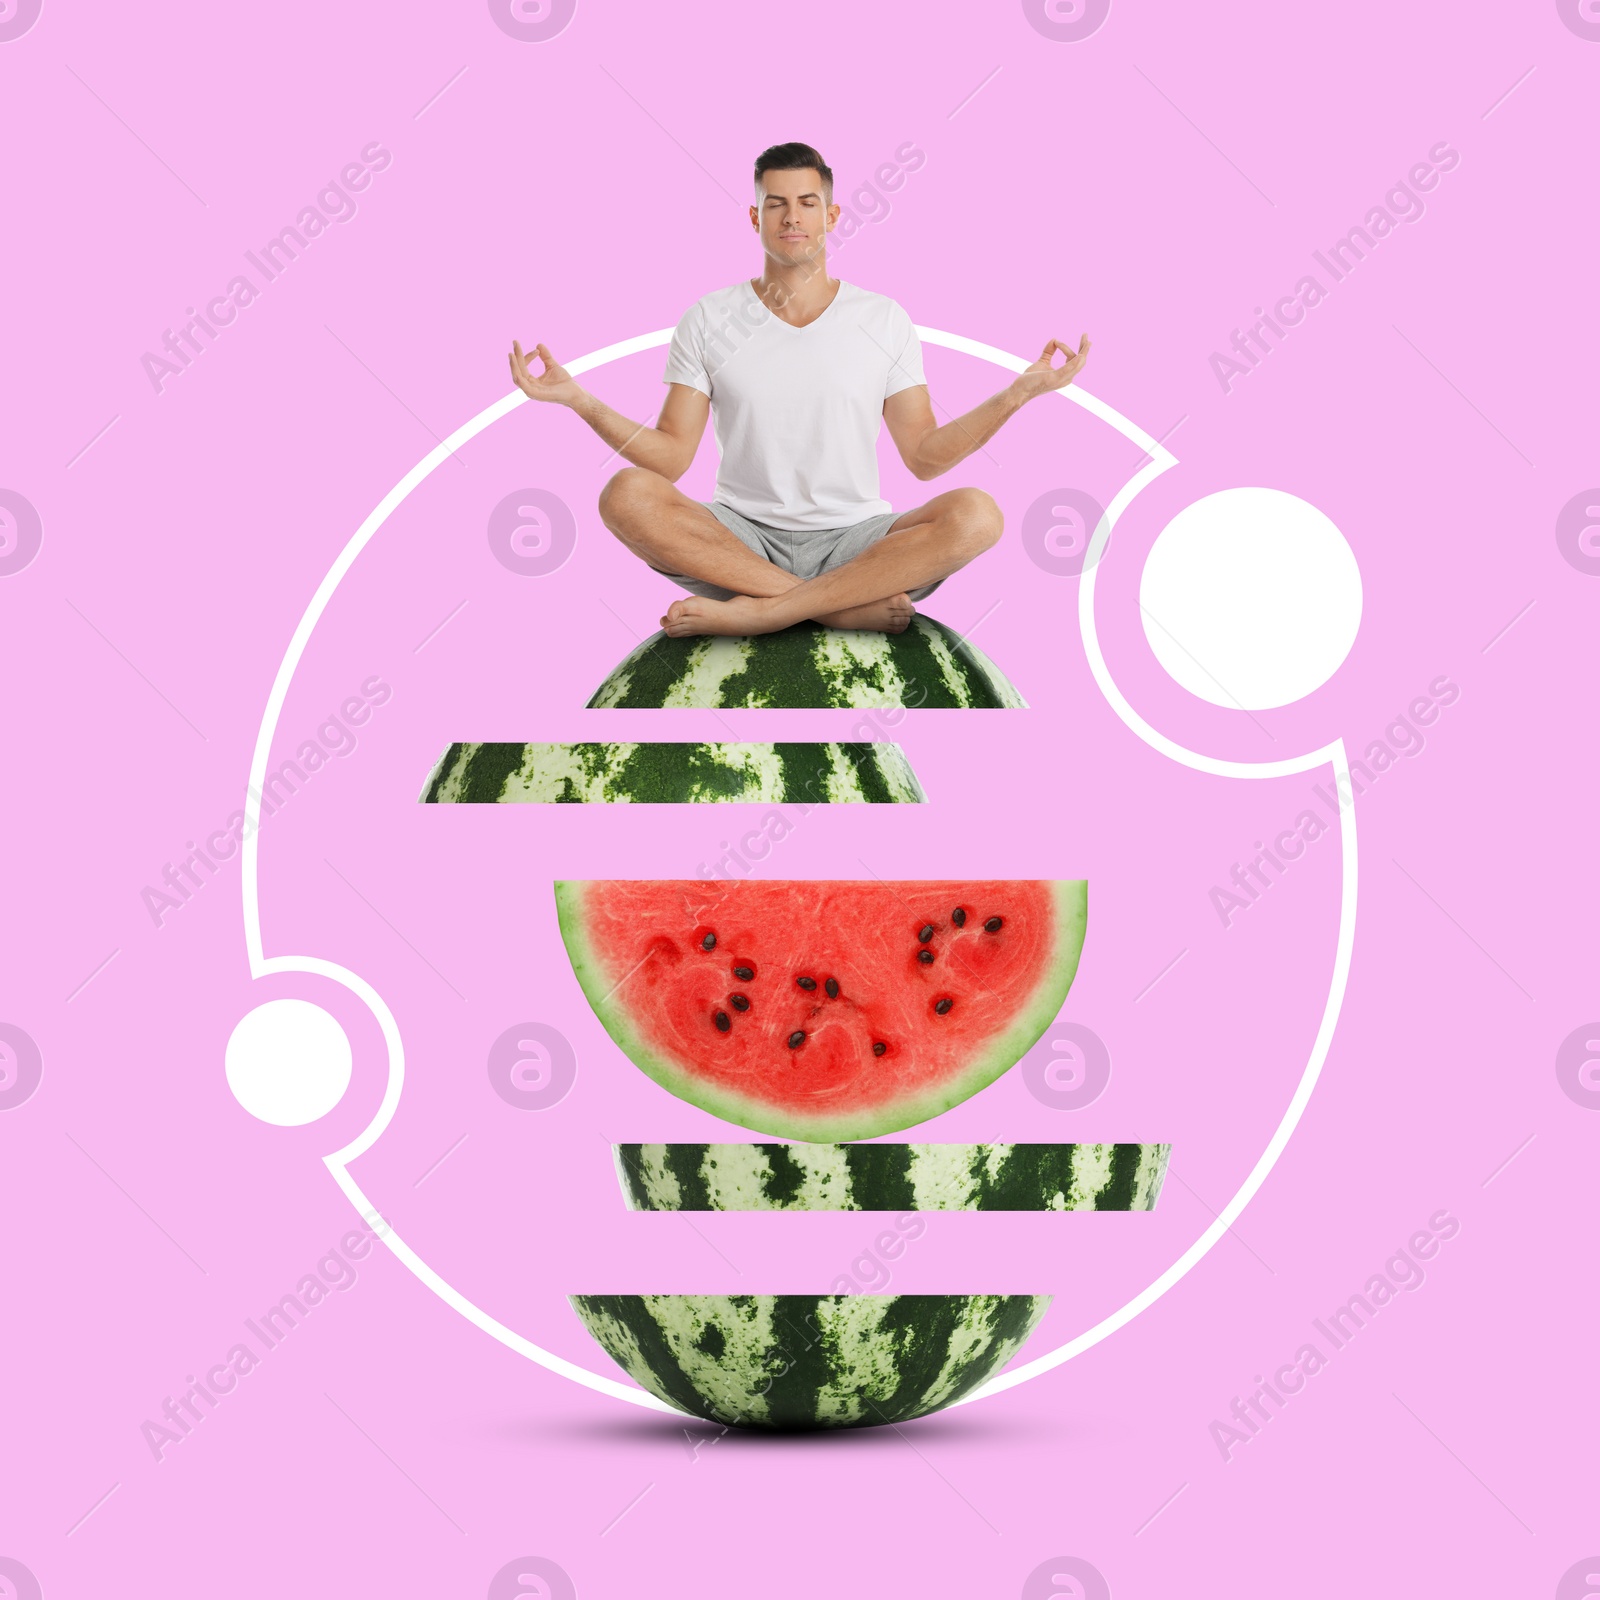 Image of Happy man meditating on top of cut watermelon against pink background. Bright creative design